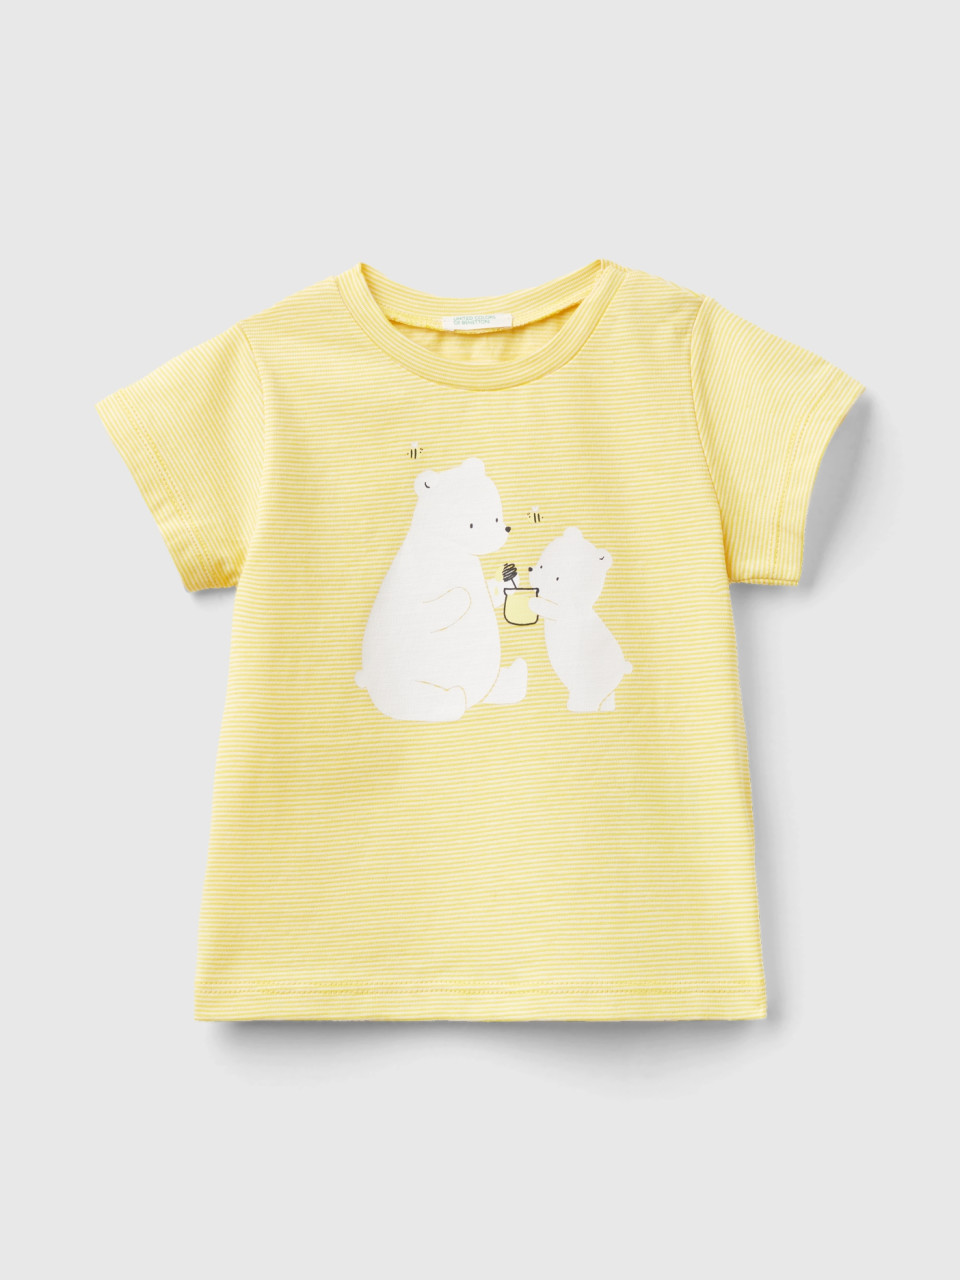 Benetton, T-shirt With Print On Front And Back, Yellow, Kids